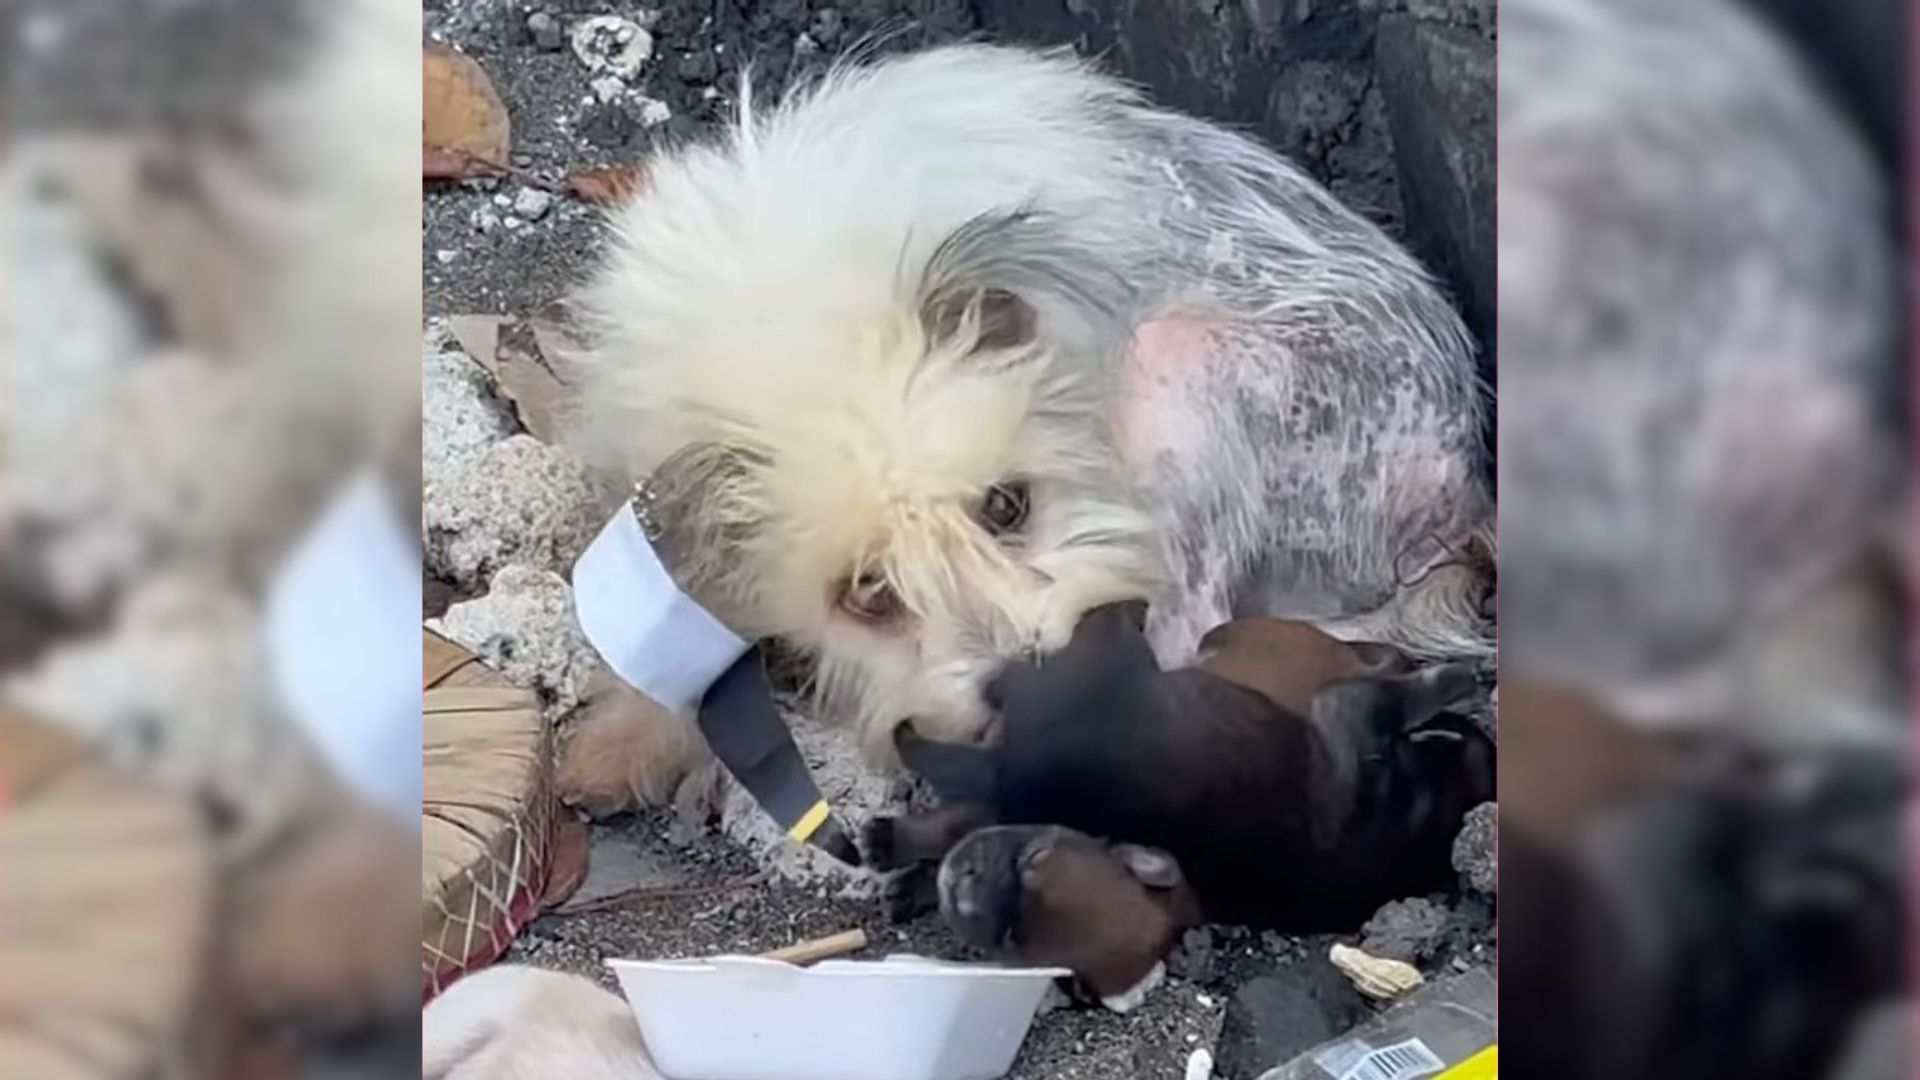 A Lovely Dog Family Cruelly Dumped In Trash Finds Humans Who Adore Them